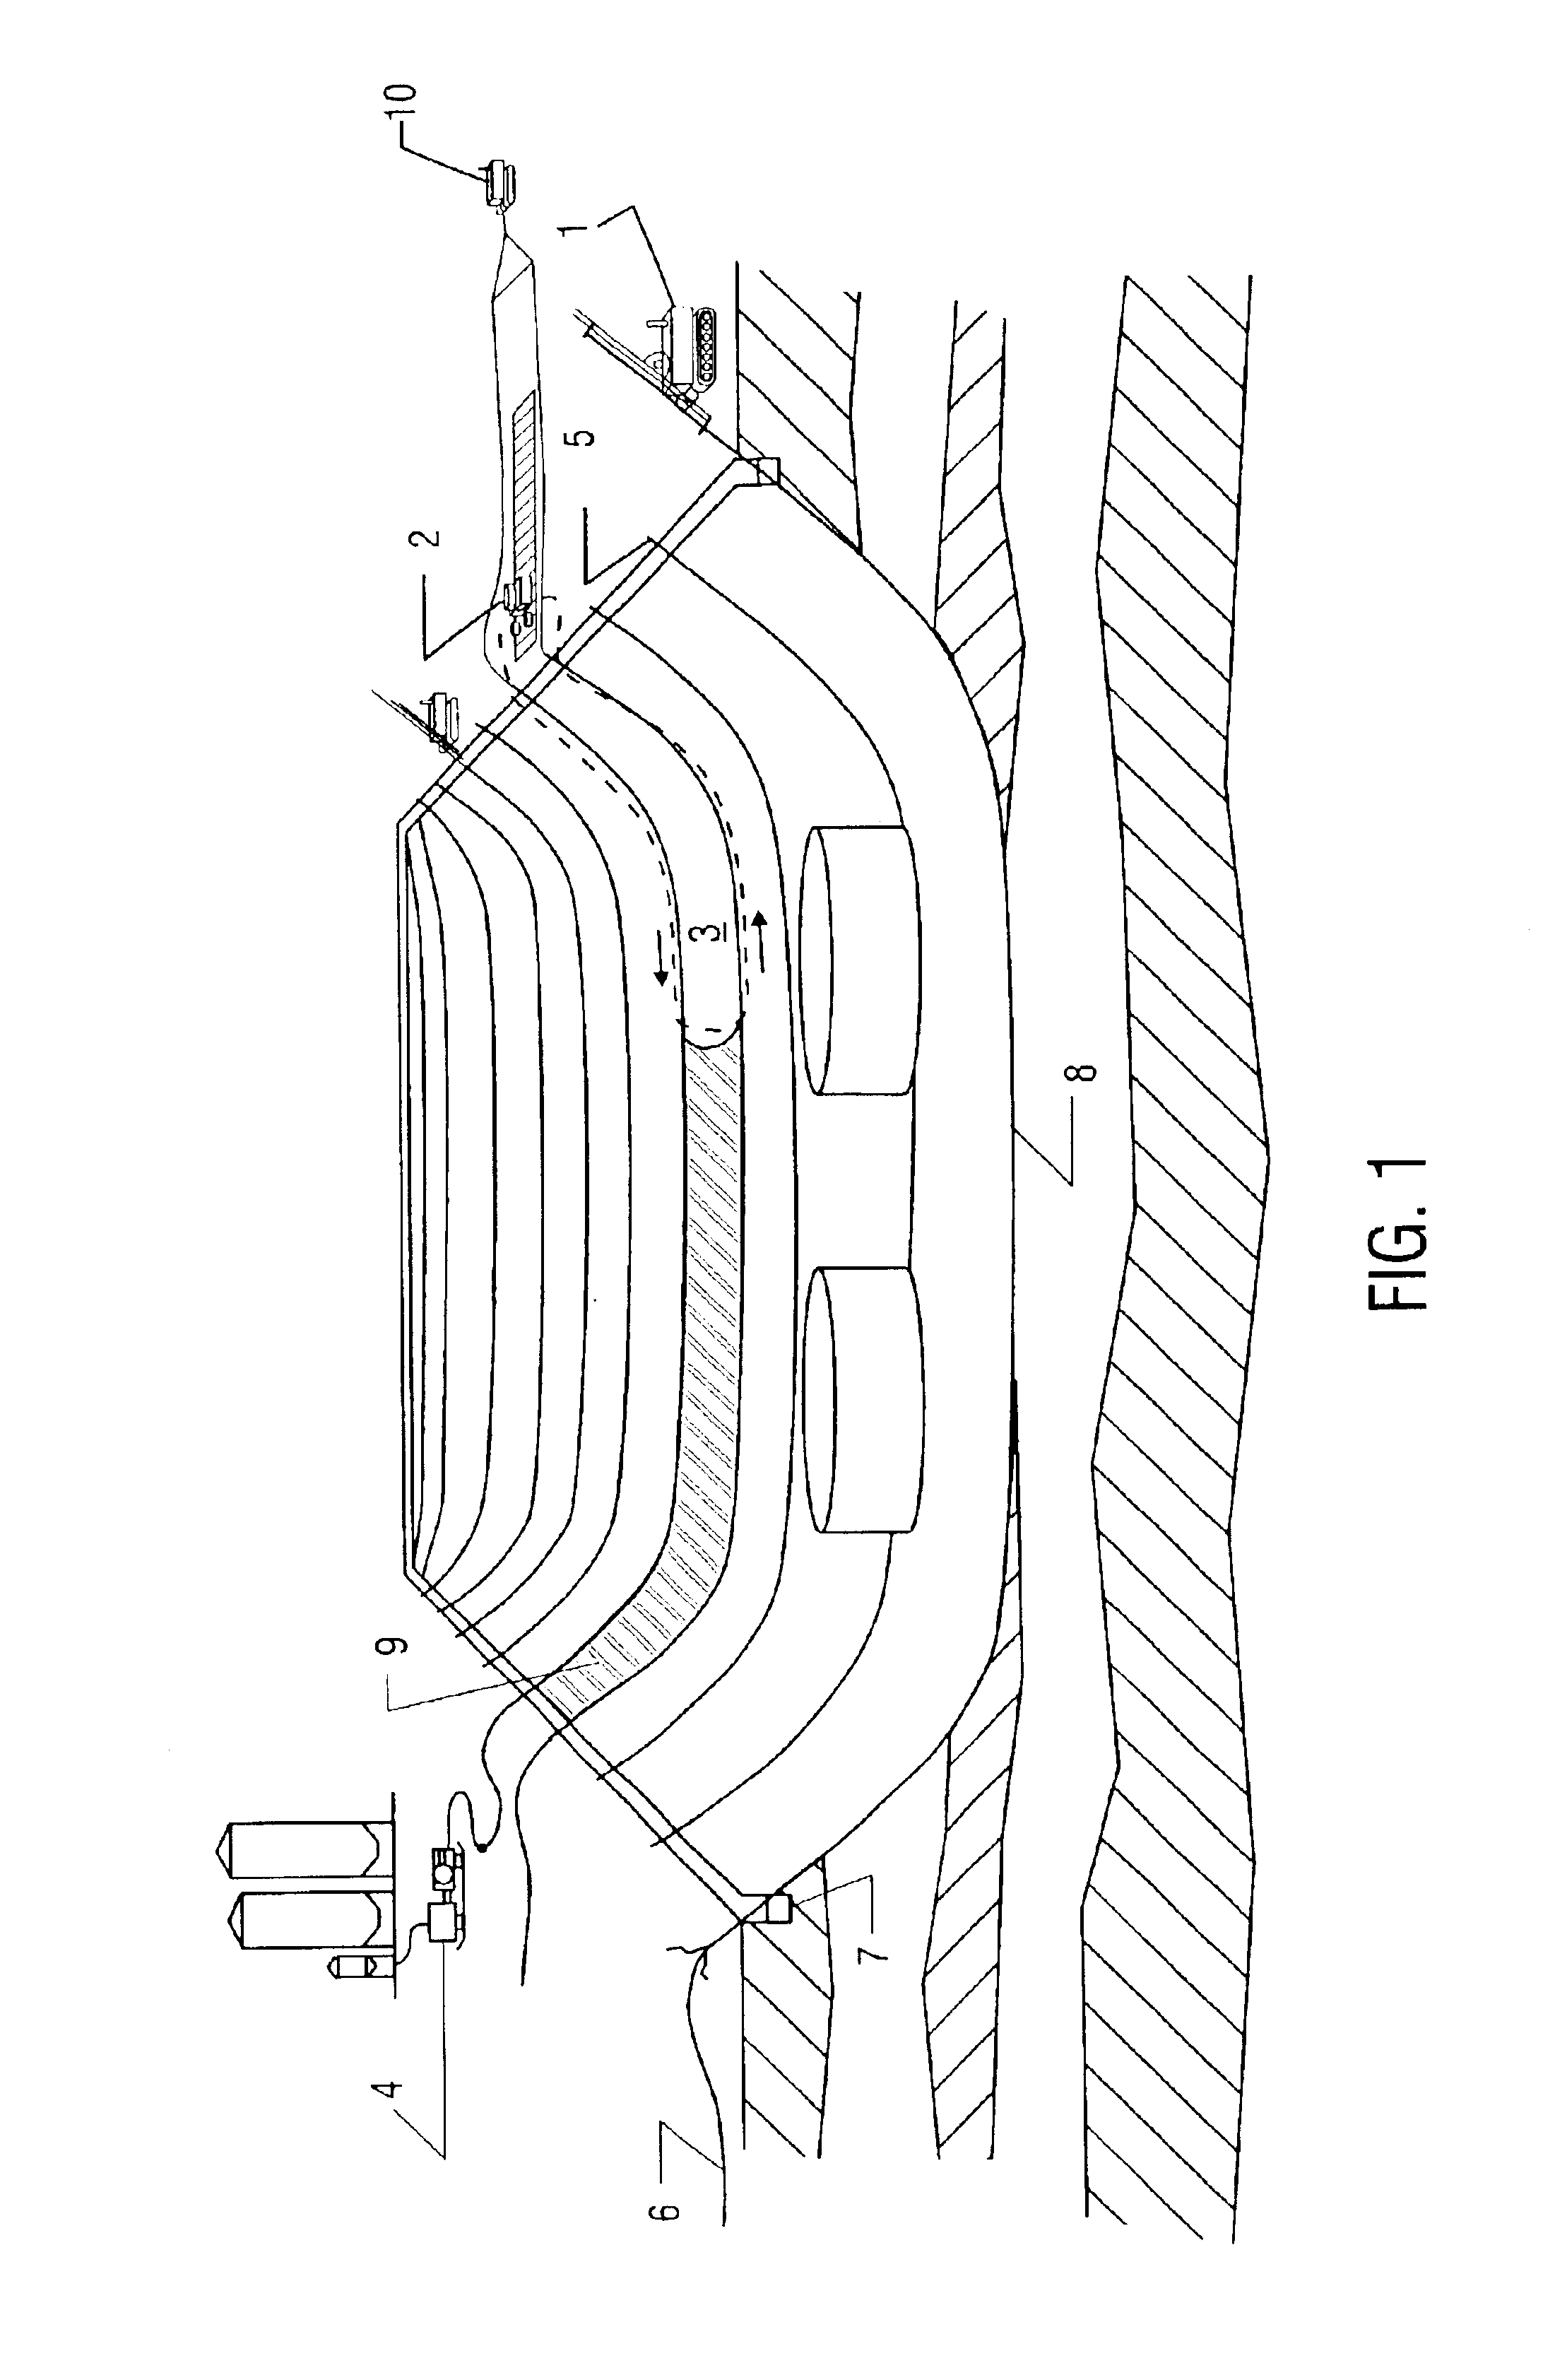 Grout compositions for construction of subterranean barriers